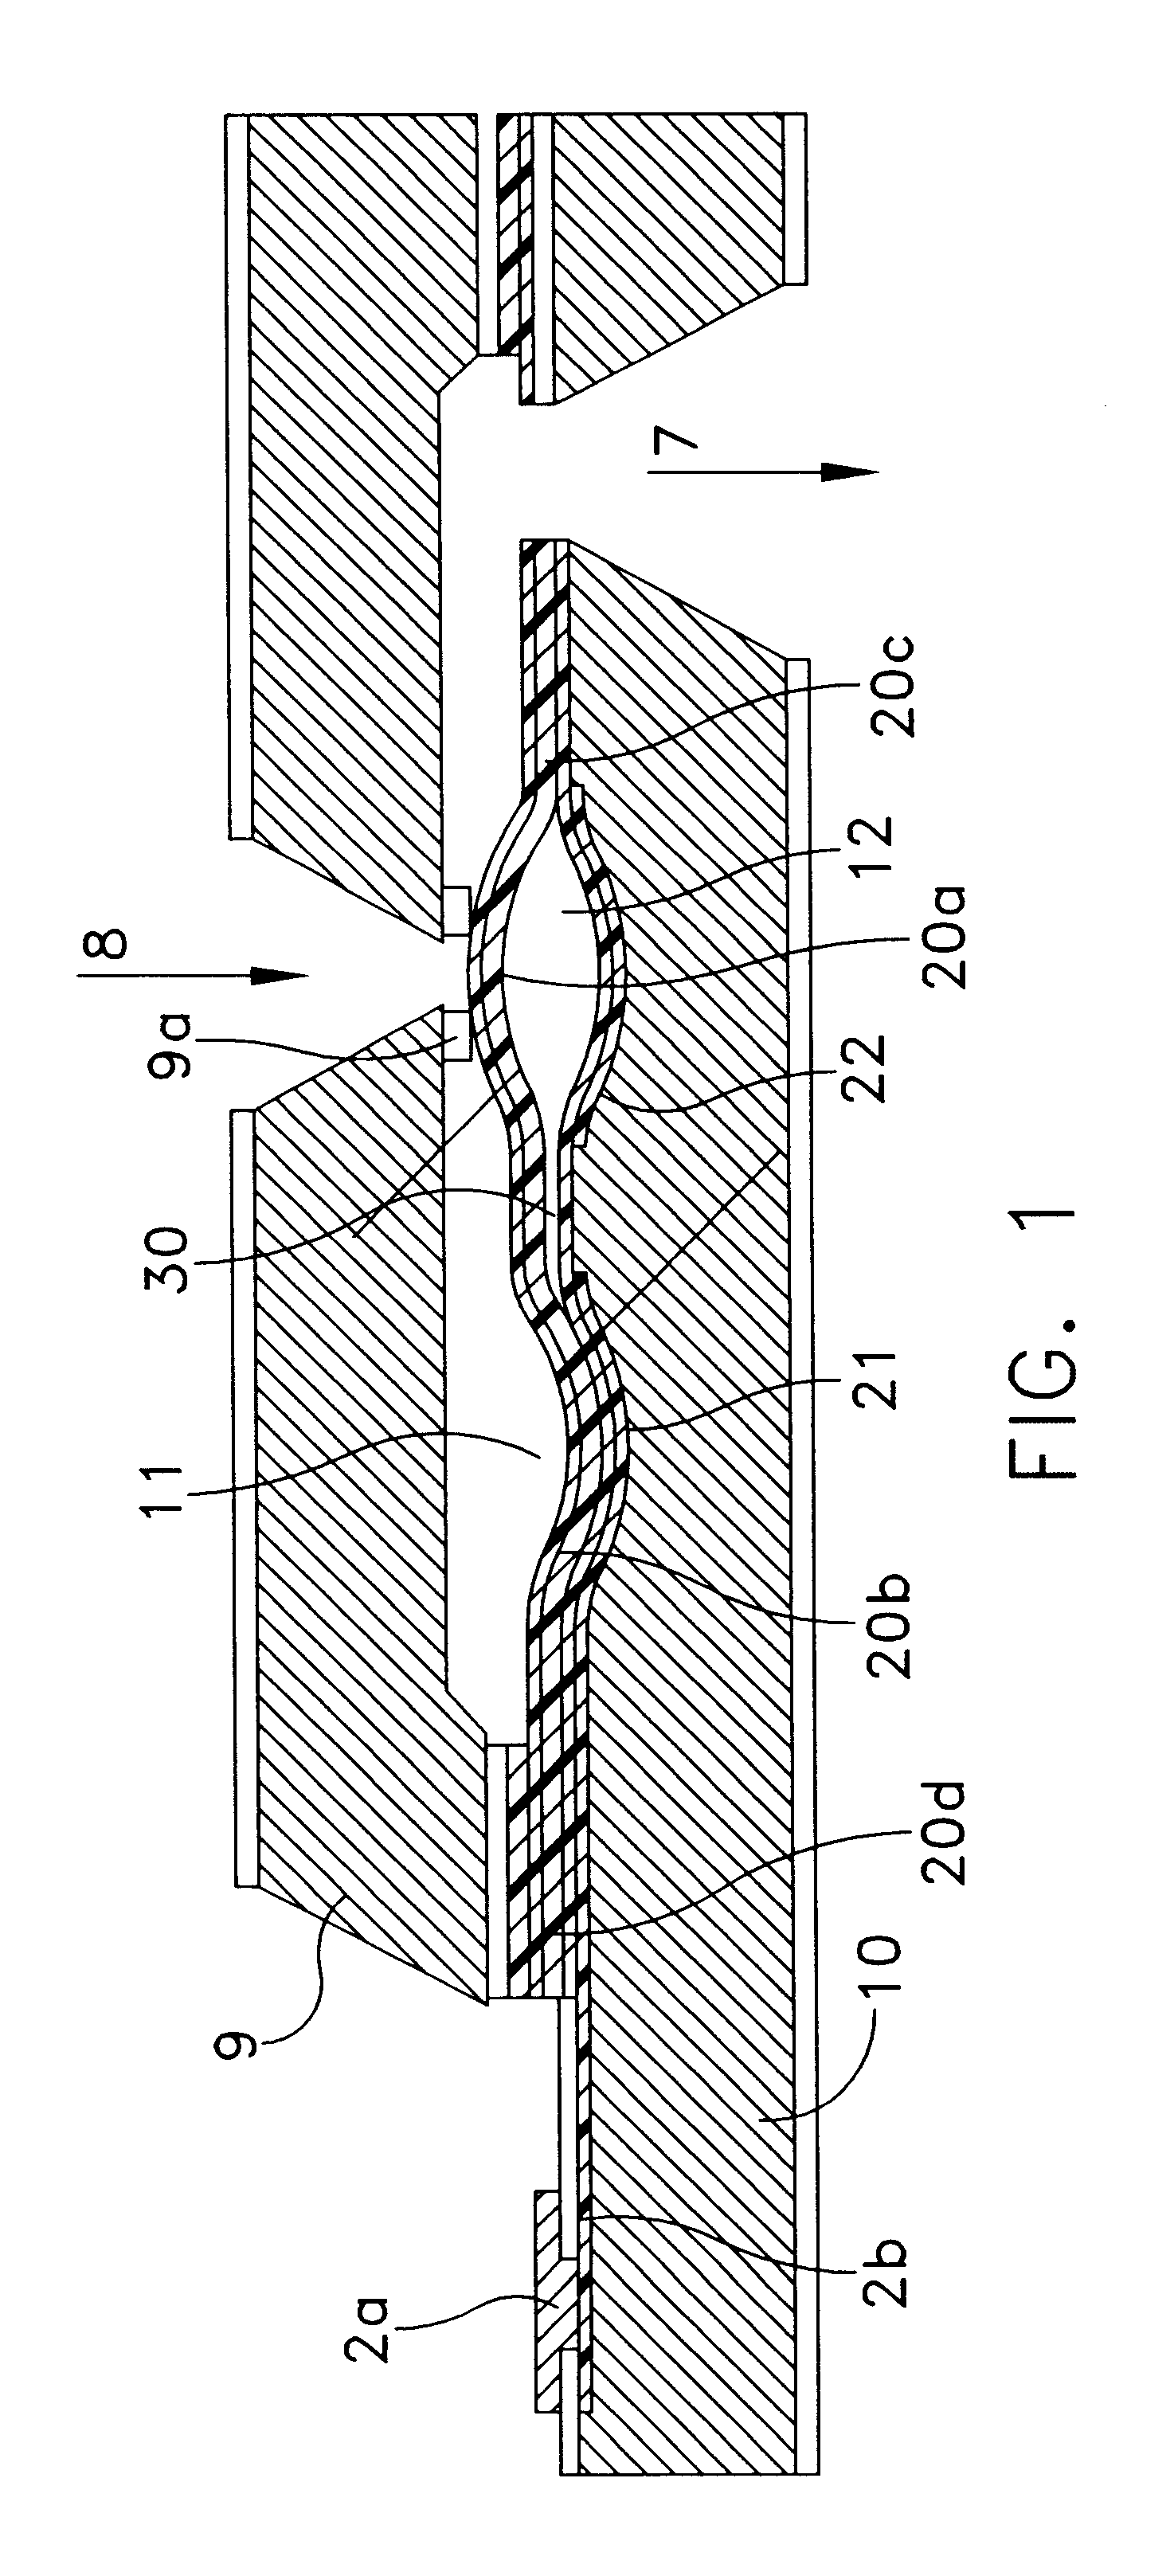 Bistable microactuator with coupled membranes